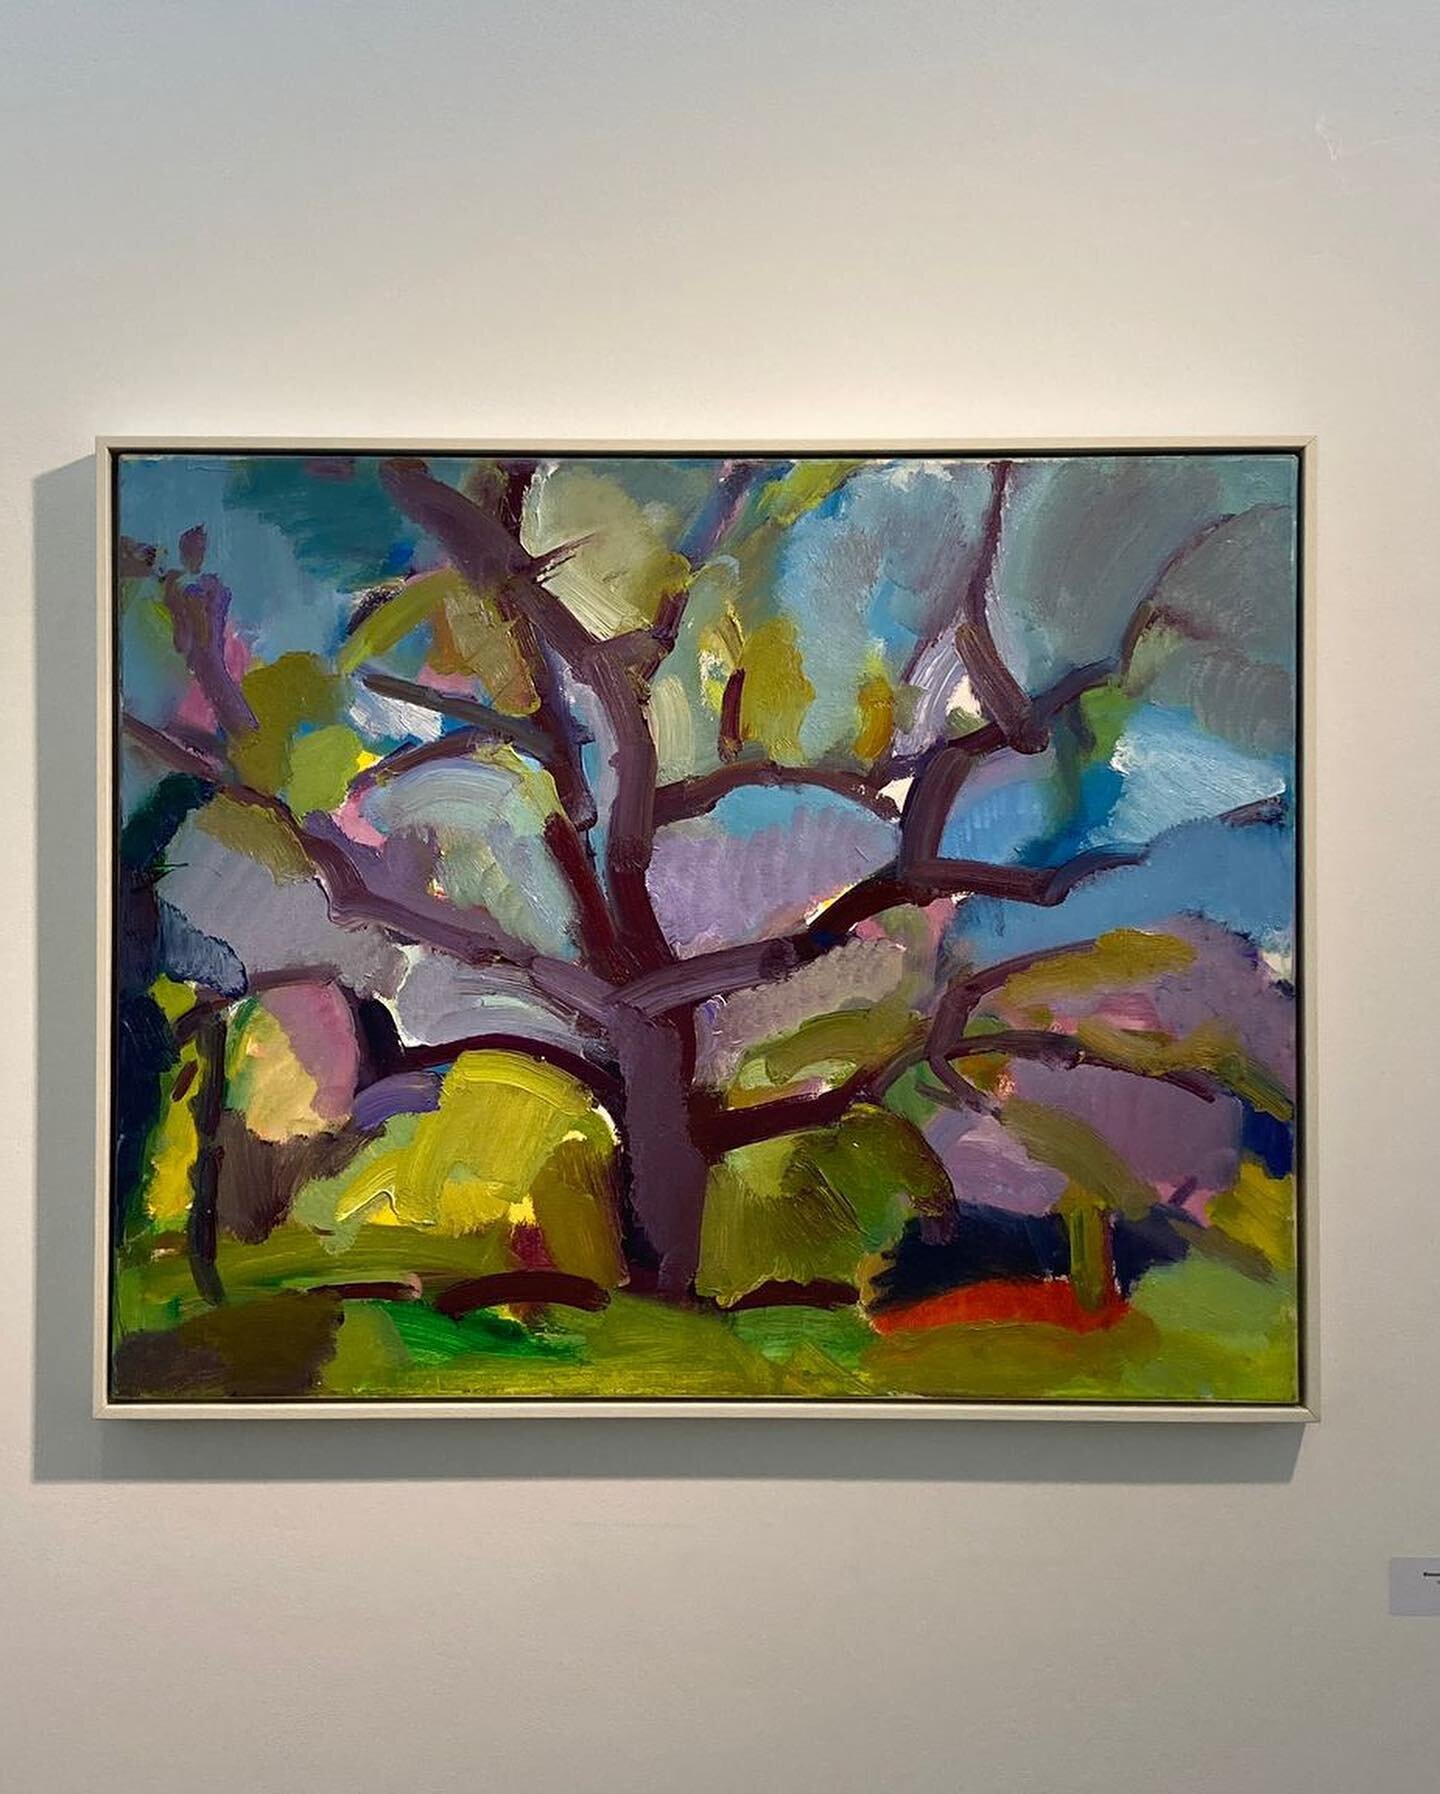 Last weekend to see this fabulous show - Spirit of Place: new paintings by Julian Le Bas. 'Plein air painting on a large scale has heightened my sense of involvement. My use of colour is instrumental in expressing my feelings about form and light wit